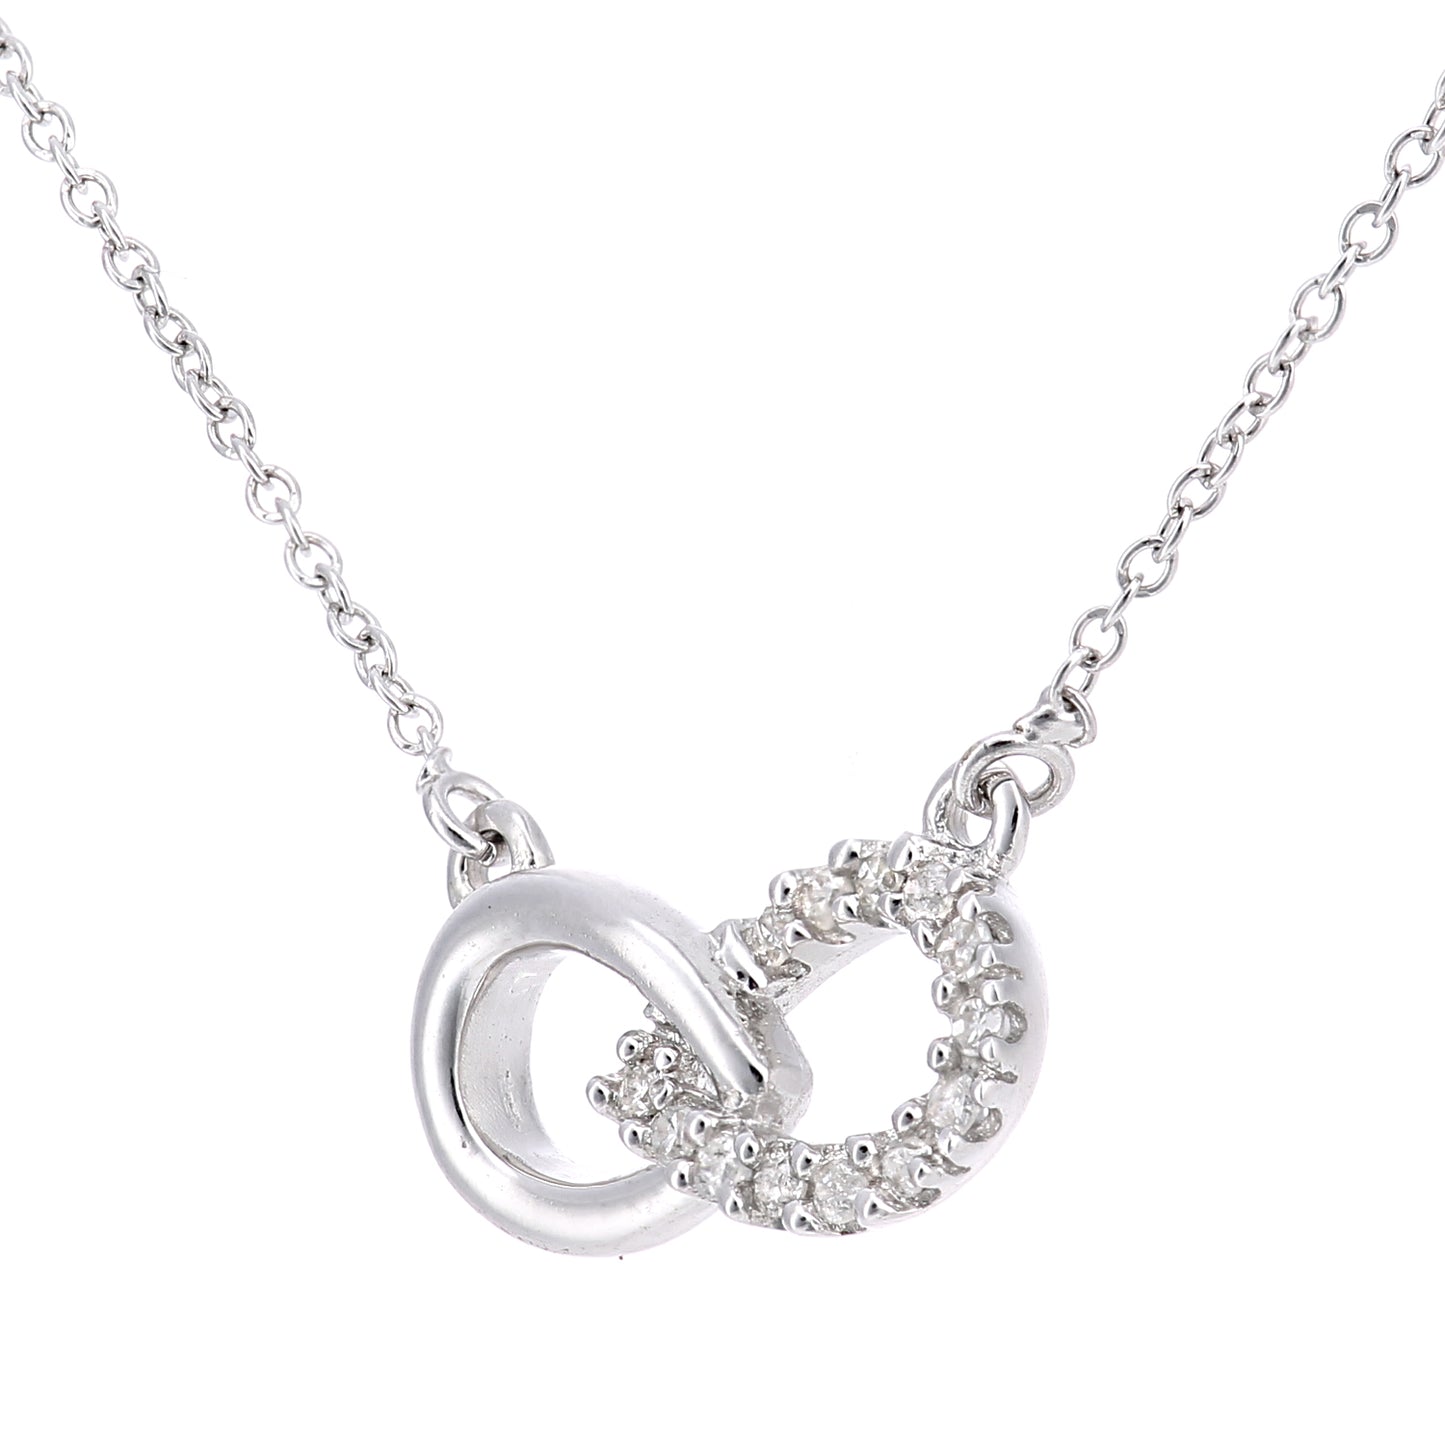 9ct White Gold  Round 5pts Diamond Infinity Charm Necklace 18 inch - PP0AXL5967W